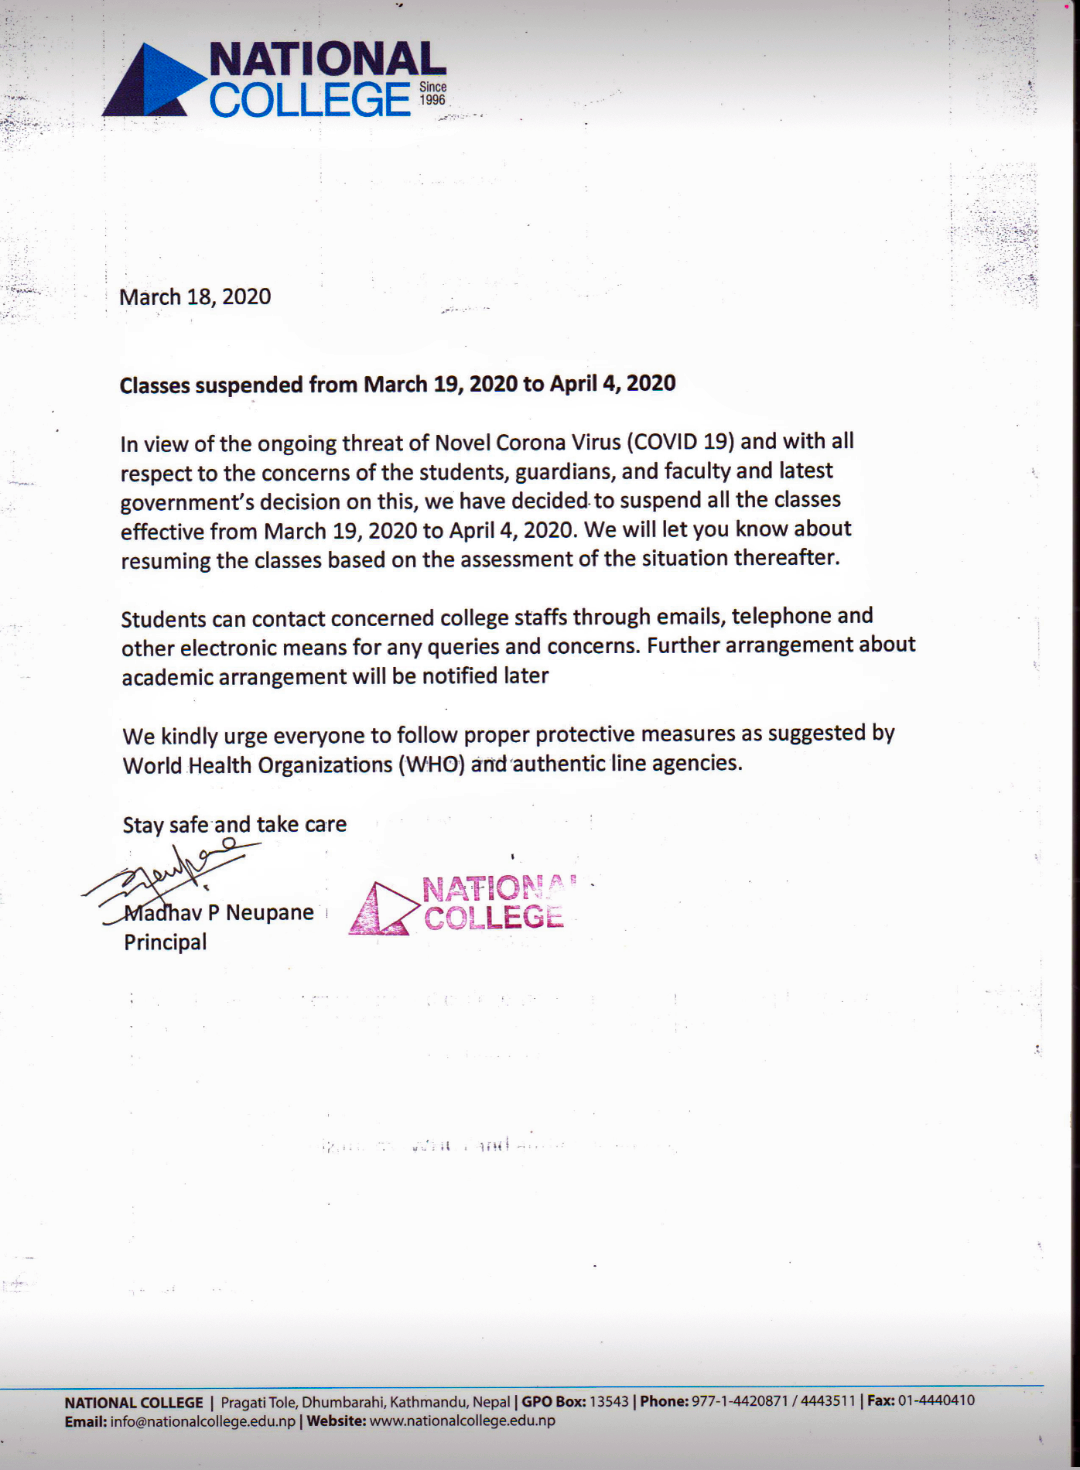 Classes suspended from March 19, 2020 to April 4, 2020 due to COVID-19 !!